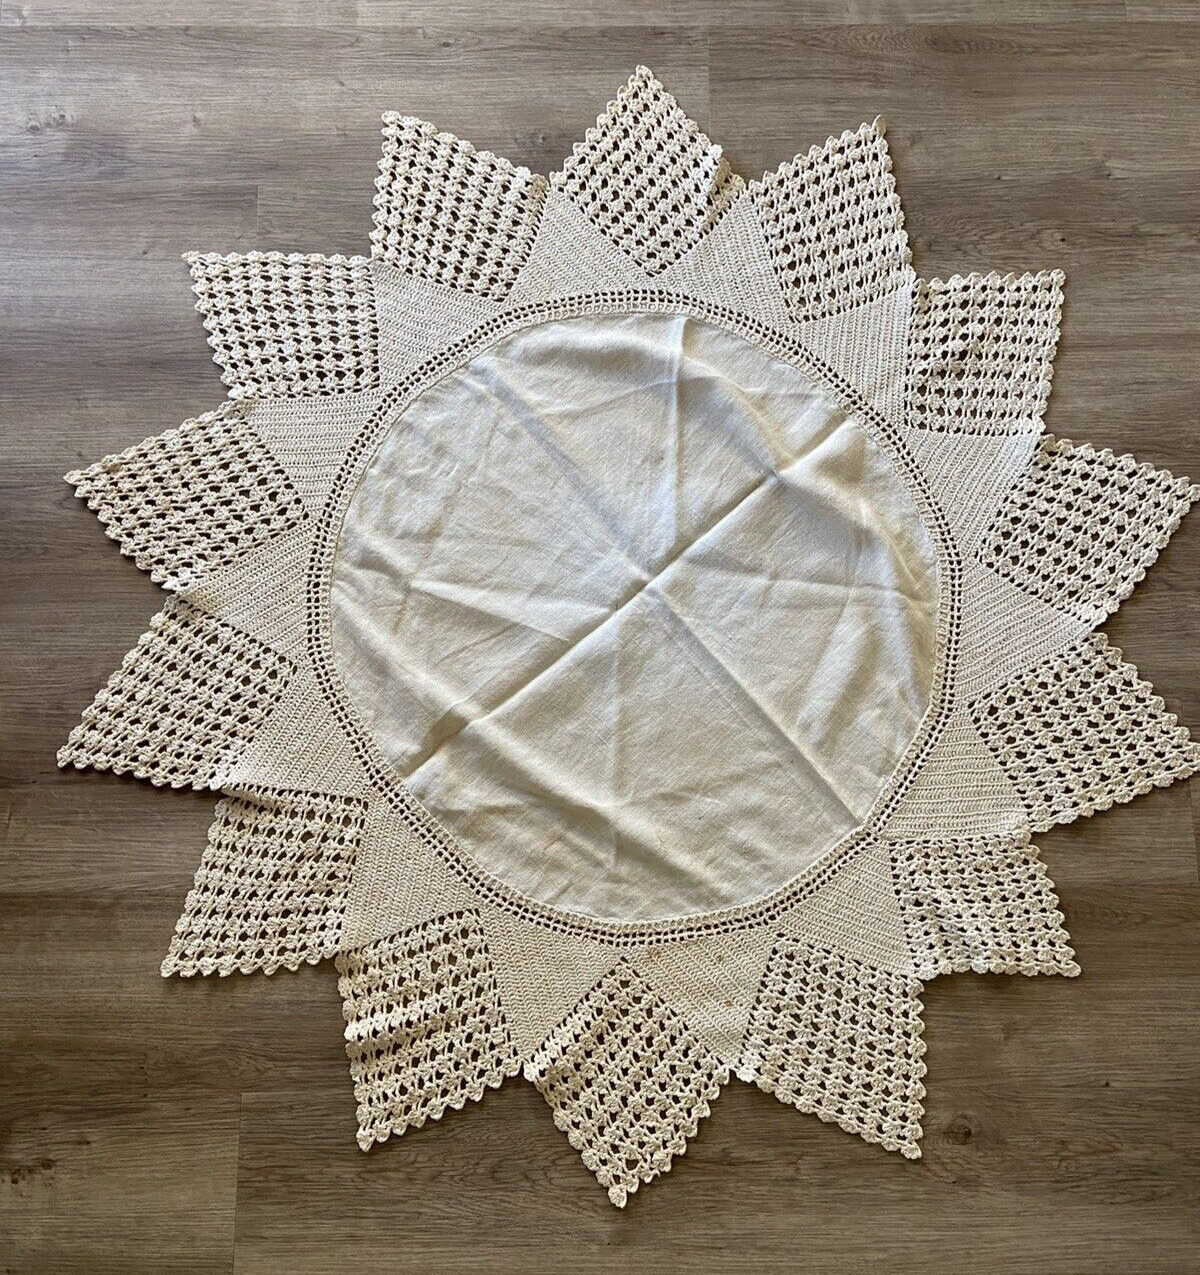 Vintage Handmade Round Linen Table Cover with Crochet Edges